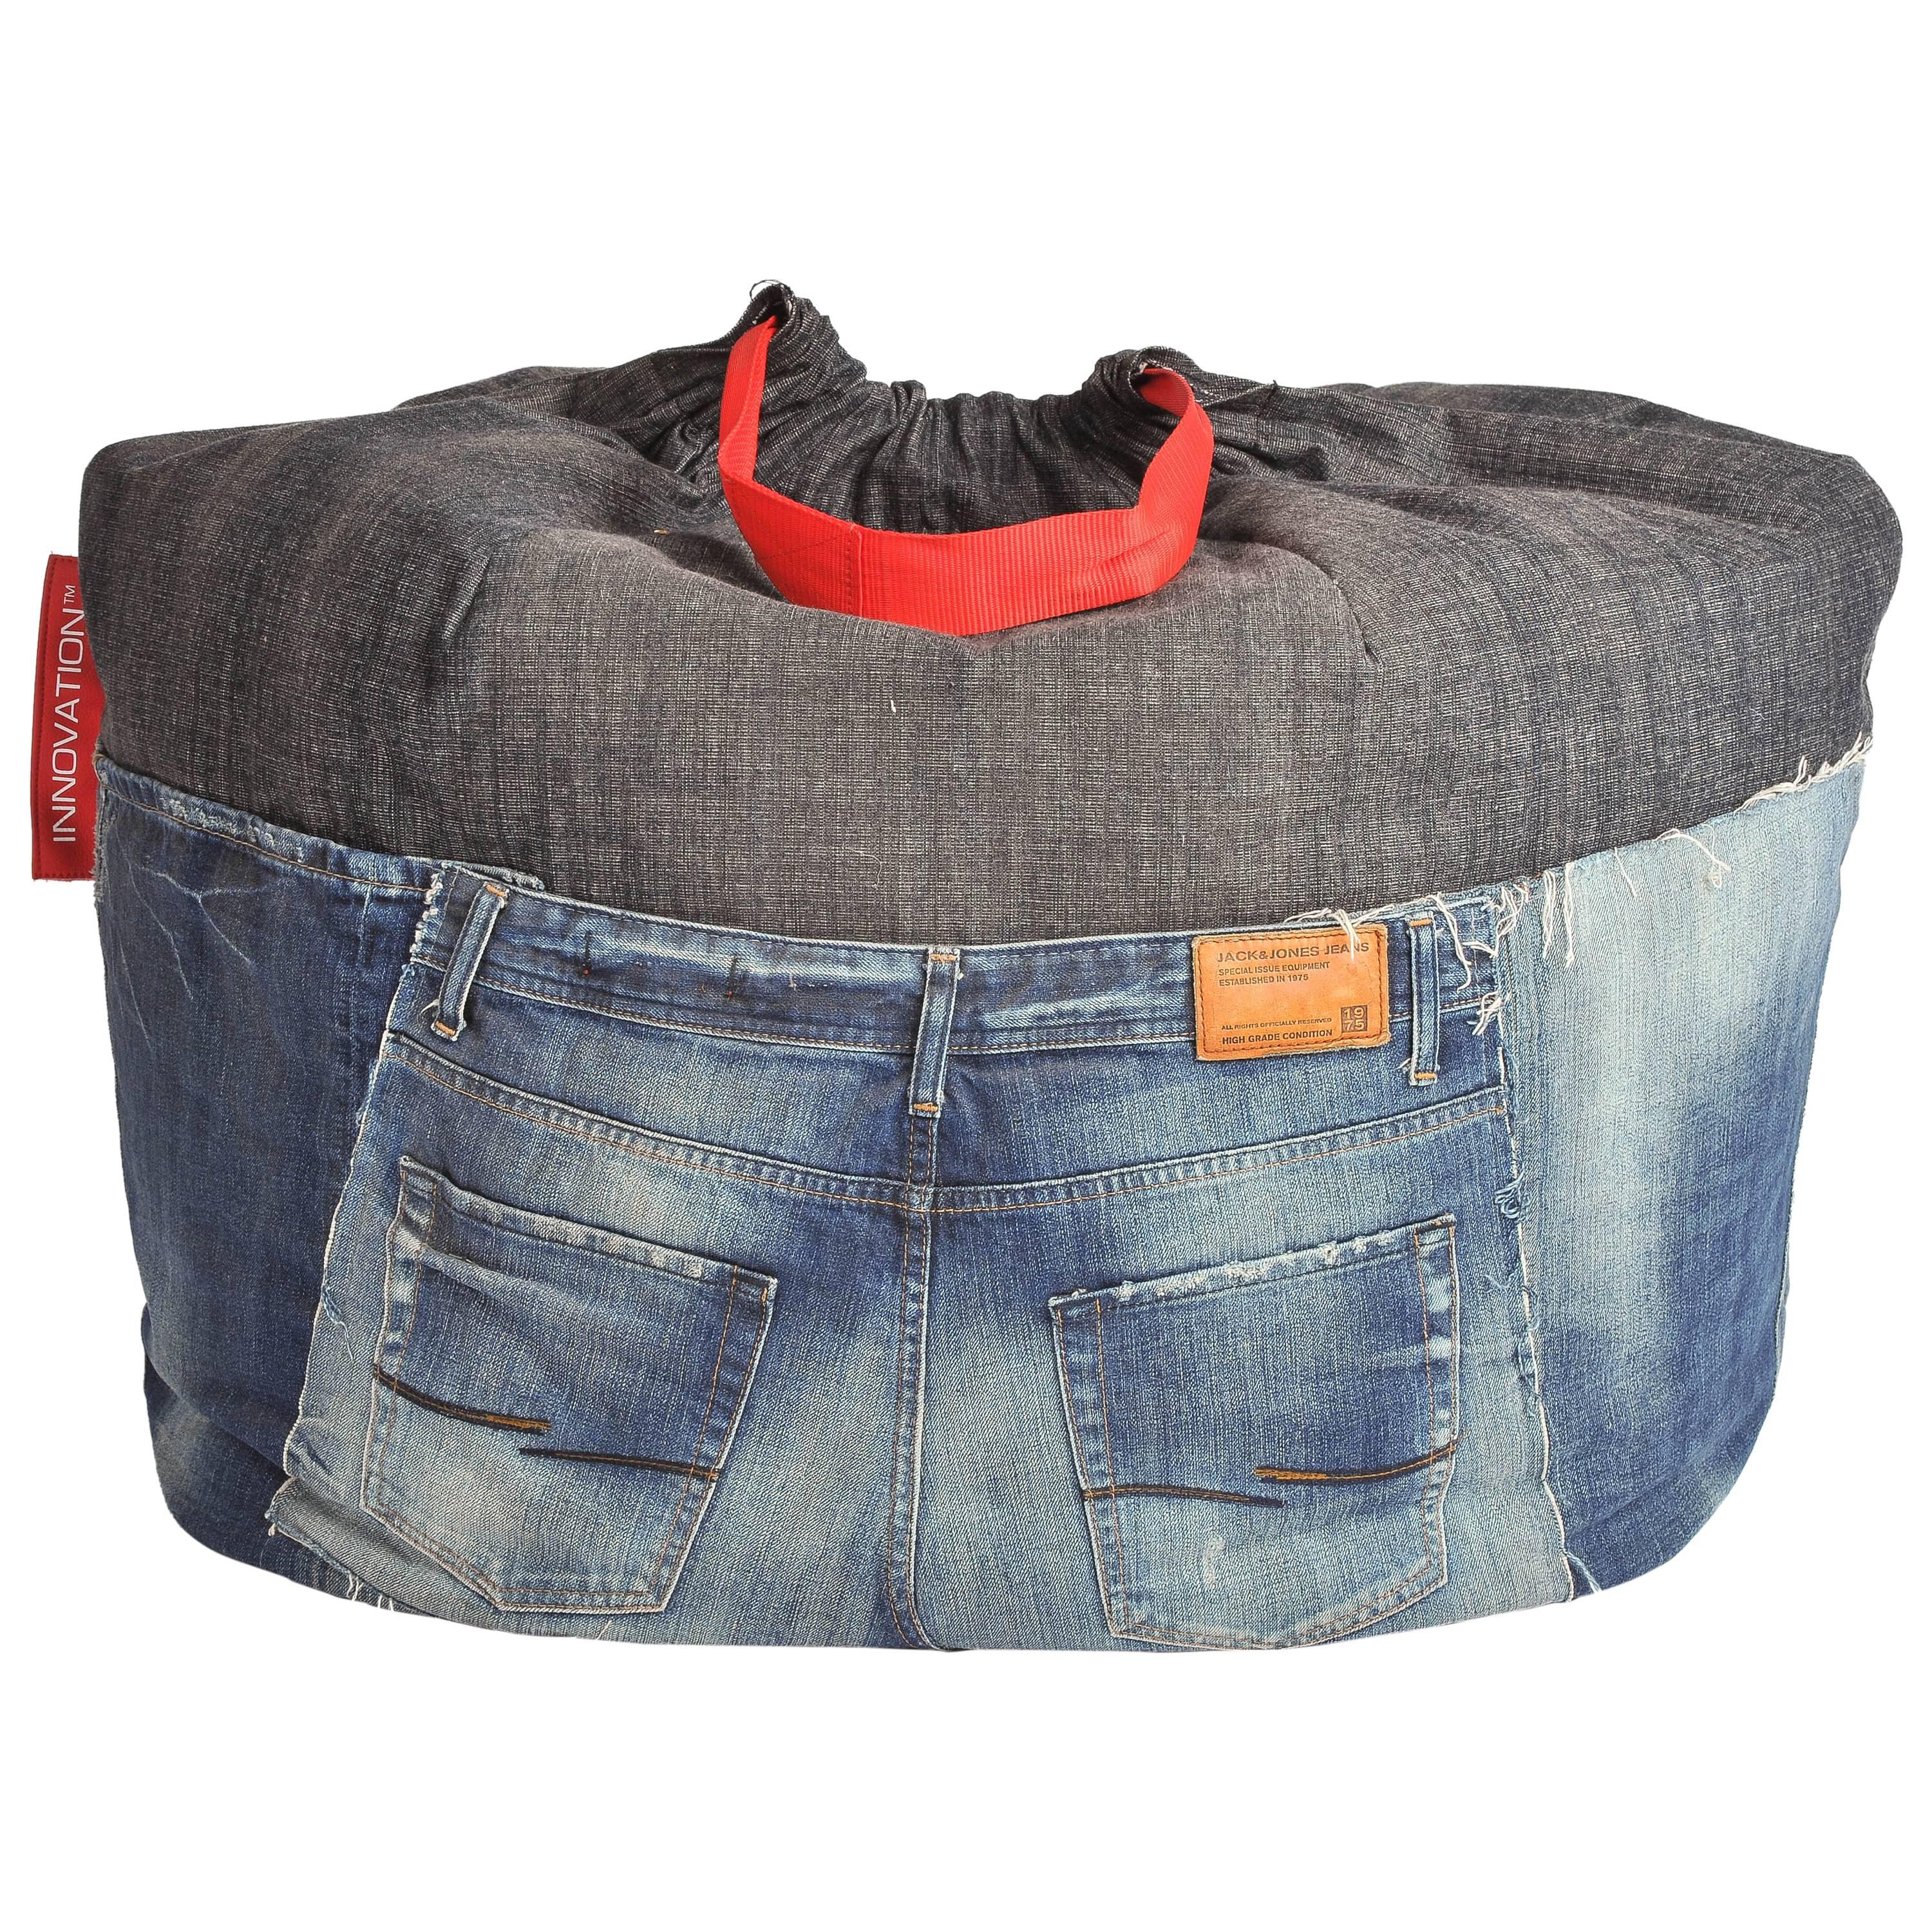 Unique Rock & Roll Style Denim Bean Bag by Breaad For Sale